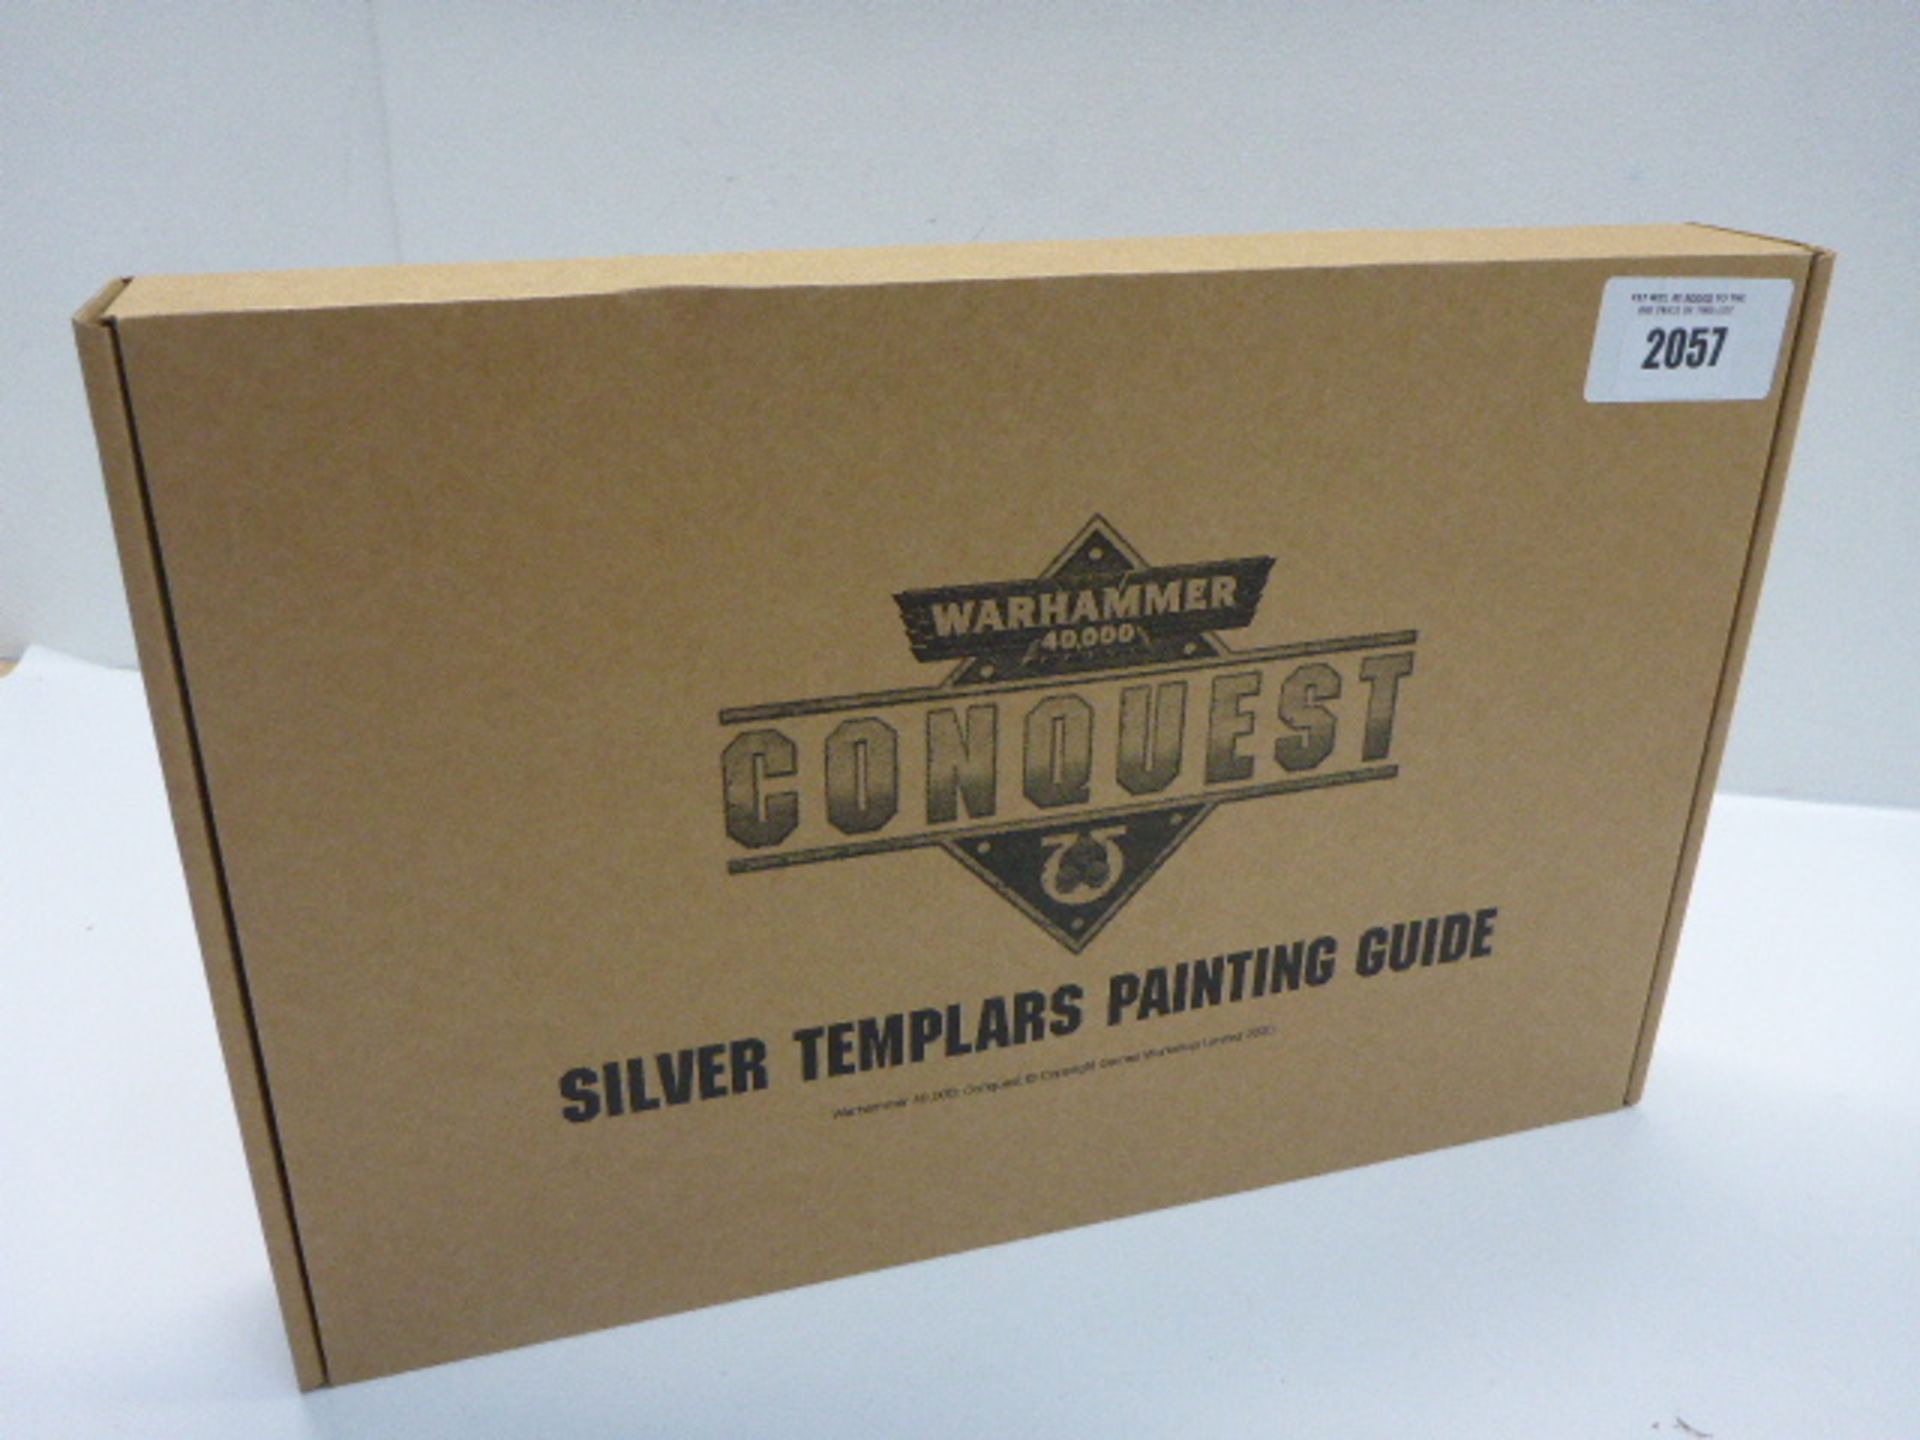 Warhammer 40,000 Conquest Silver Templars Painting Guide kit.